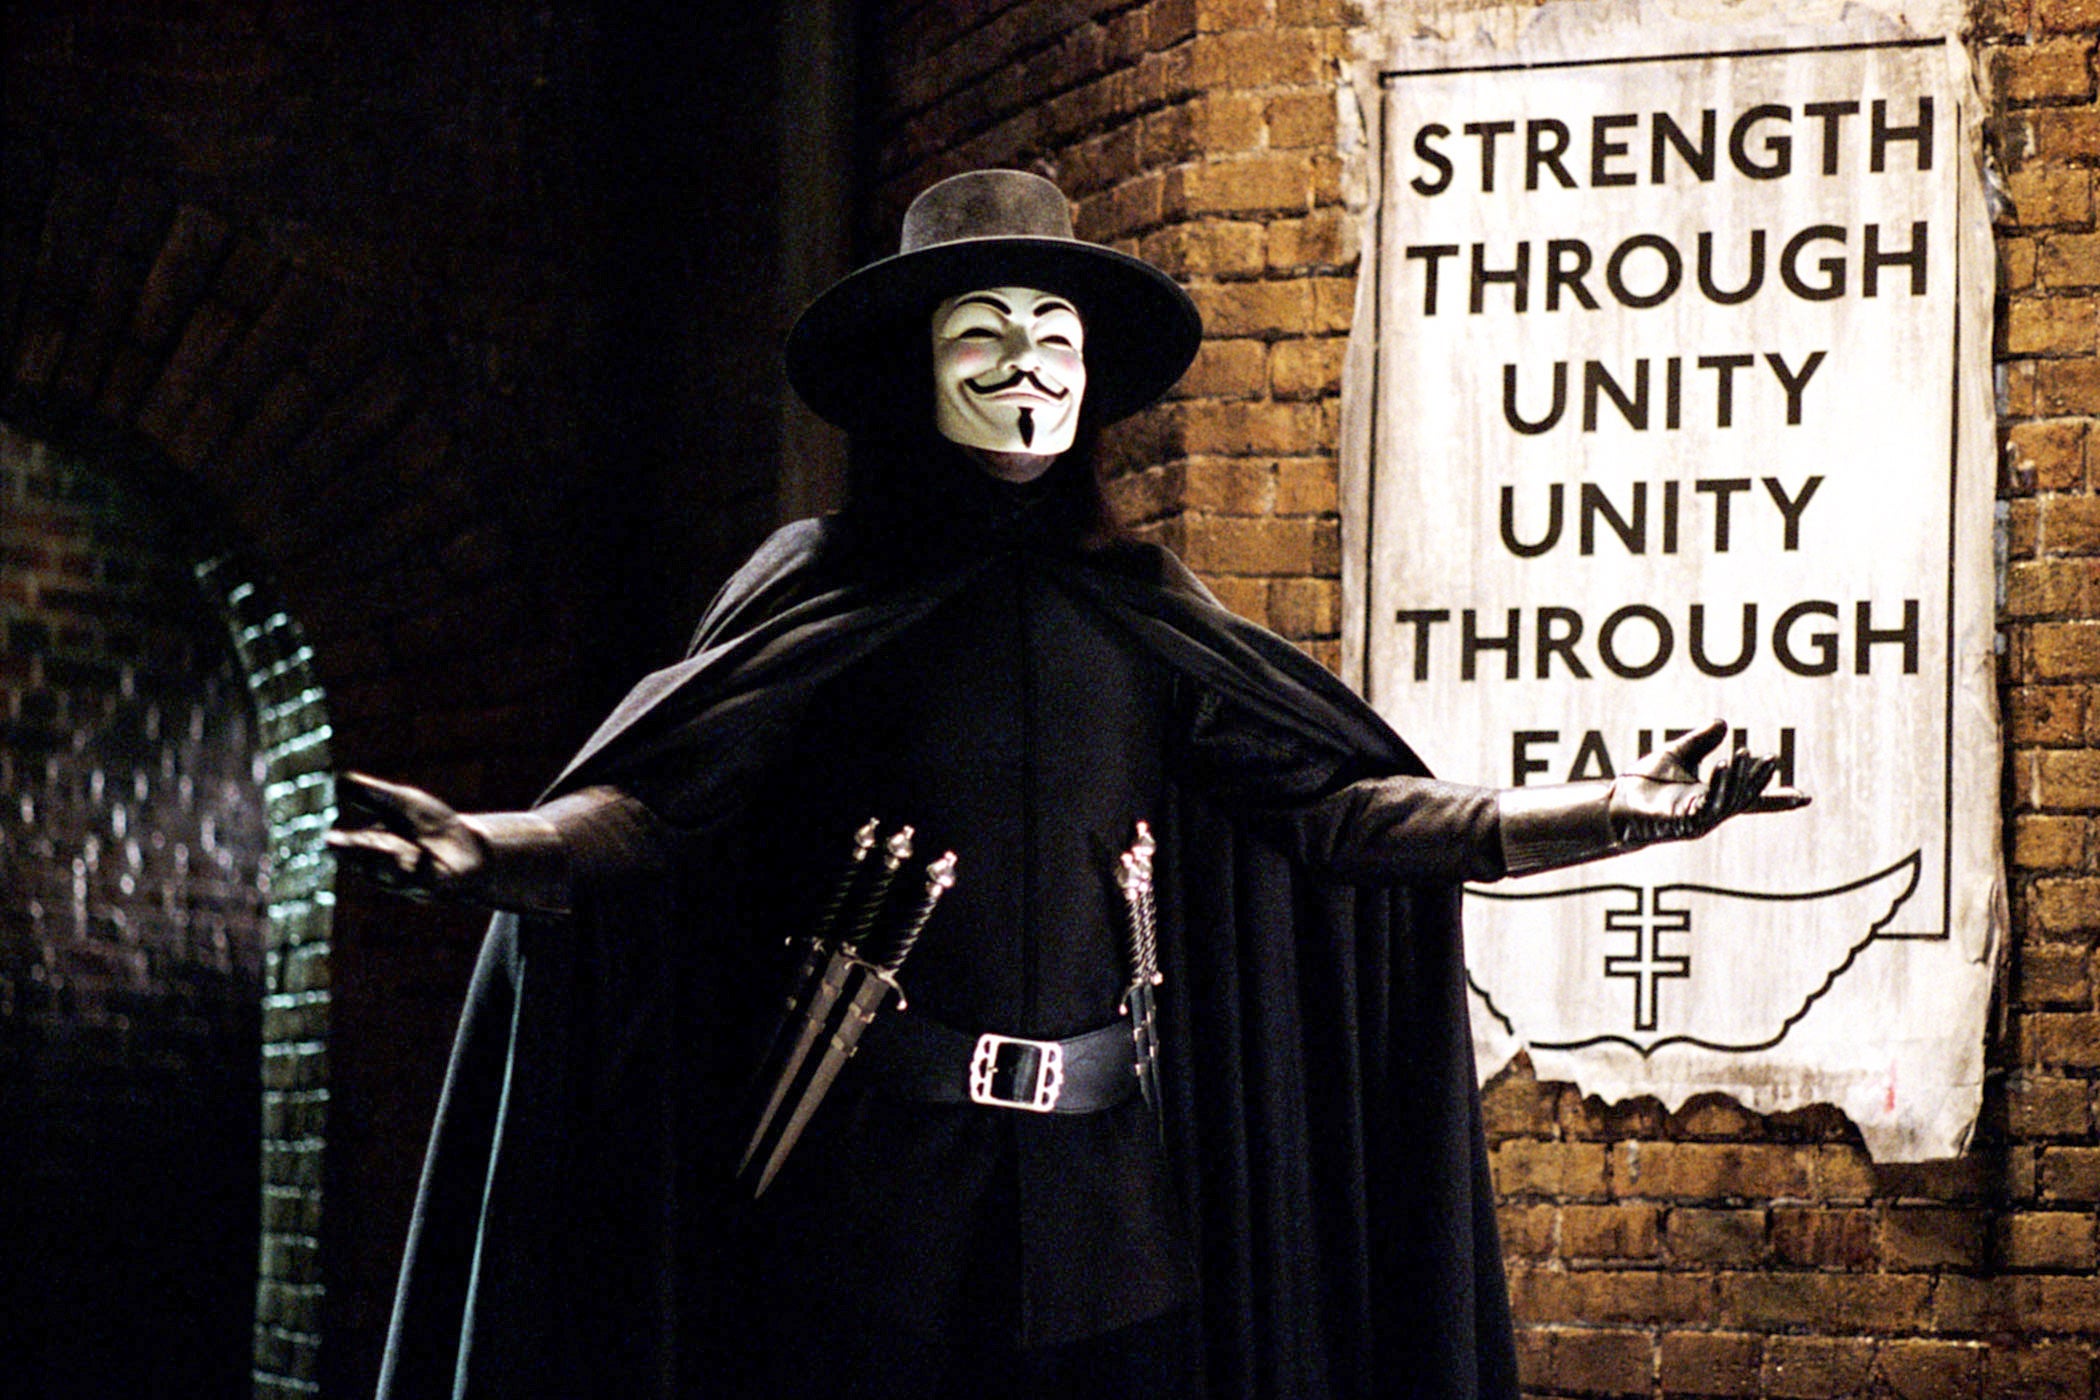 Hugo Weaving stands with his arms outstretched in his cape, top hat, tool belt with daggers, and Guy Fawkes mask, in front of a sign that says "Strength Through Unity, Unity Through Faith." 